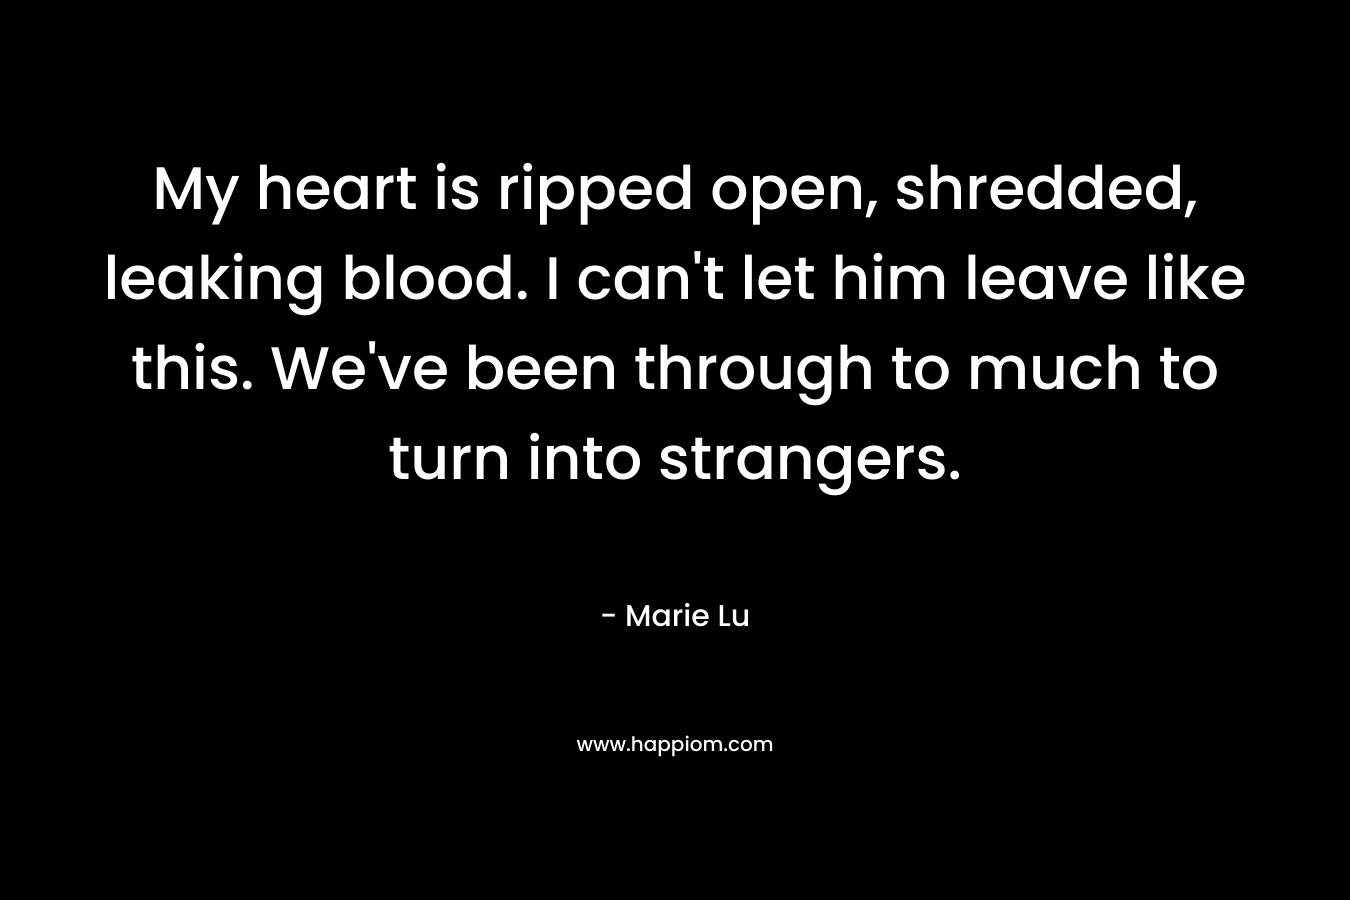 My heart is ripped open, shredded, leaking blood. I can’t let him leave like this. We’ve been through to much to turn into strangers. – Marie Lu